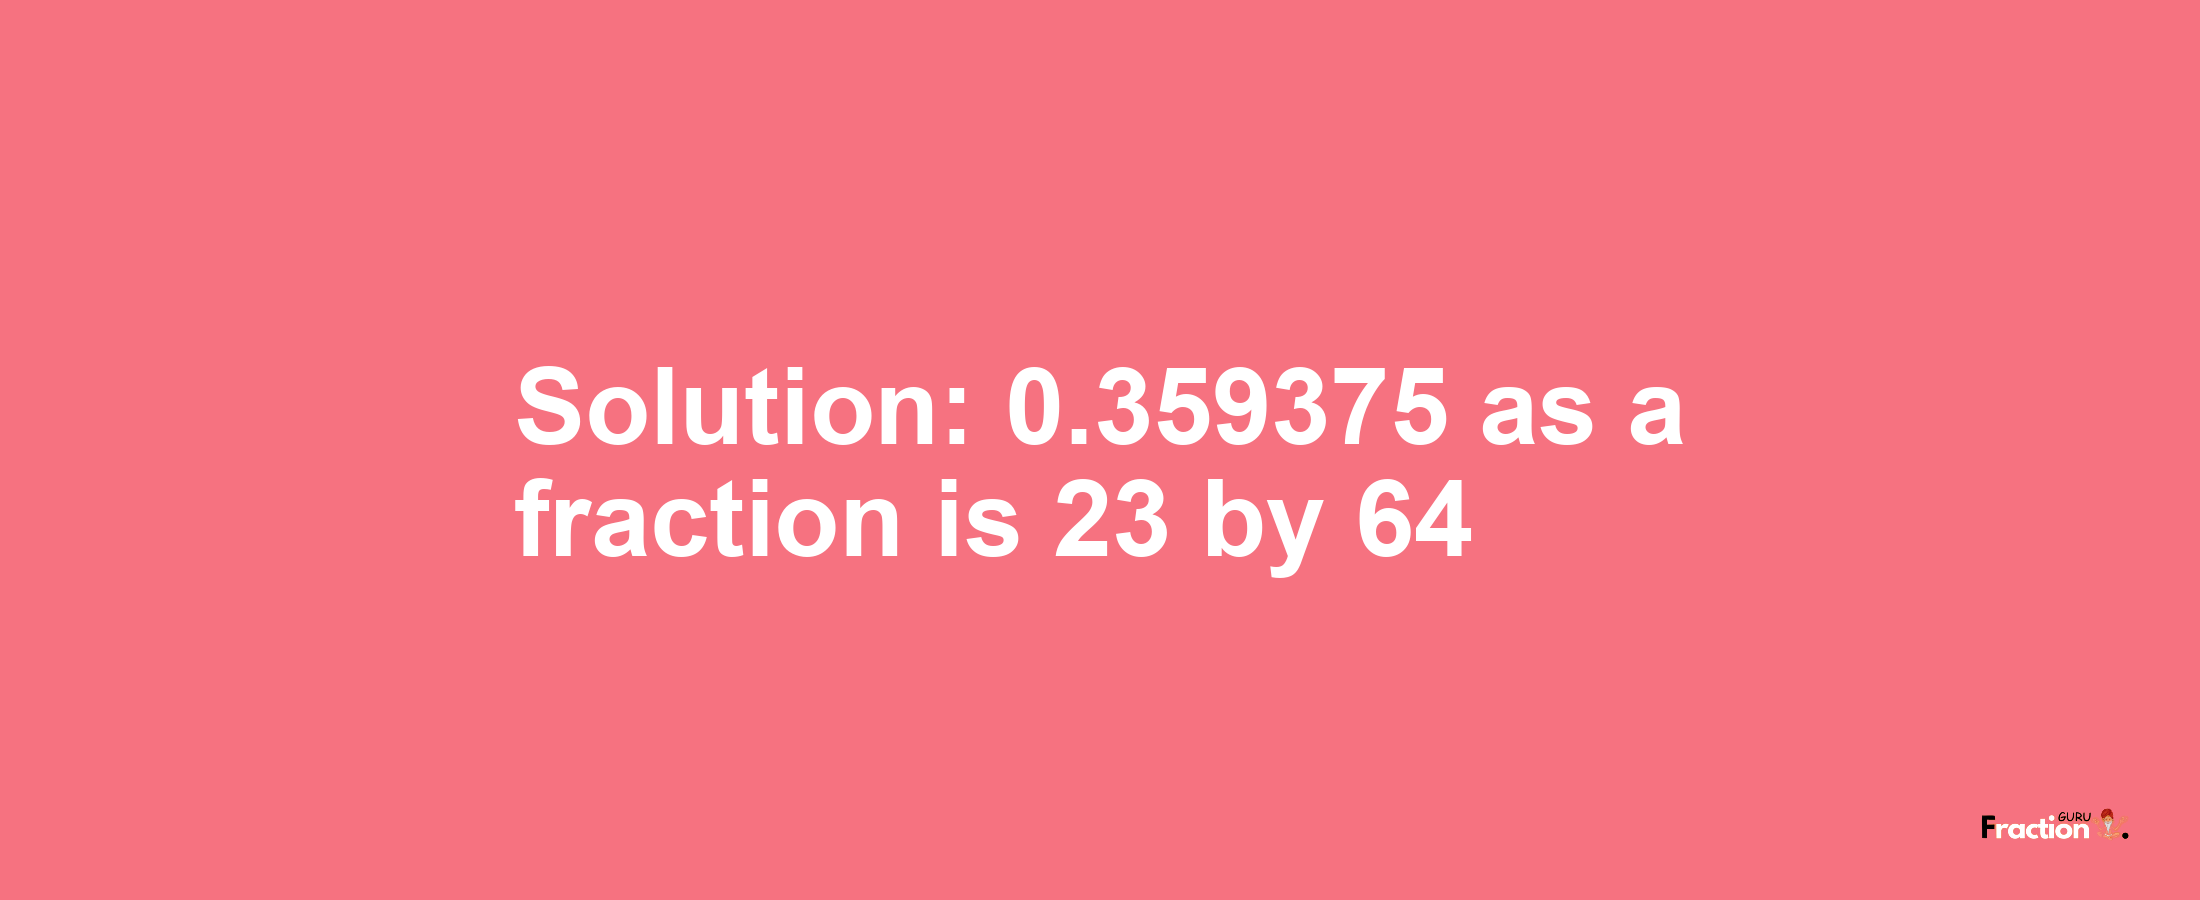 Solution:0.359375 as a fraction is 23/64